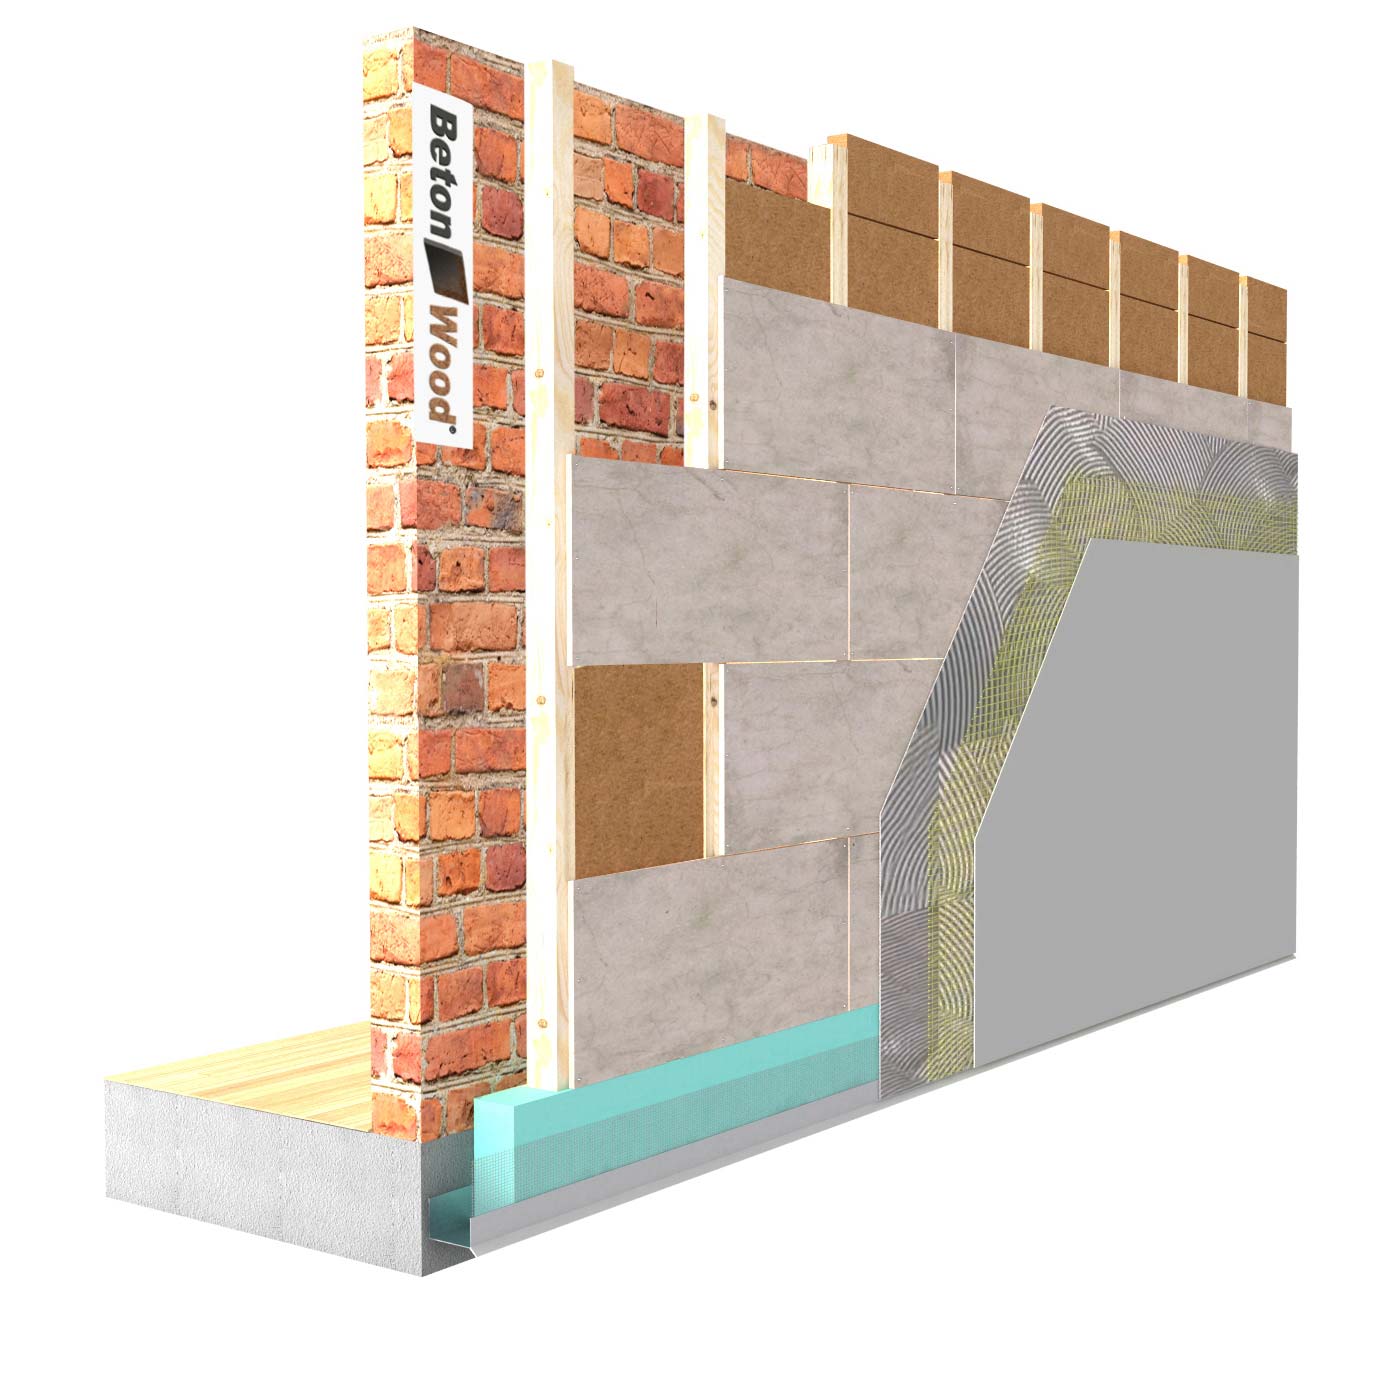 External insulation system with Therm dry fiber wood on masonry